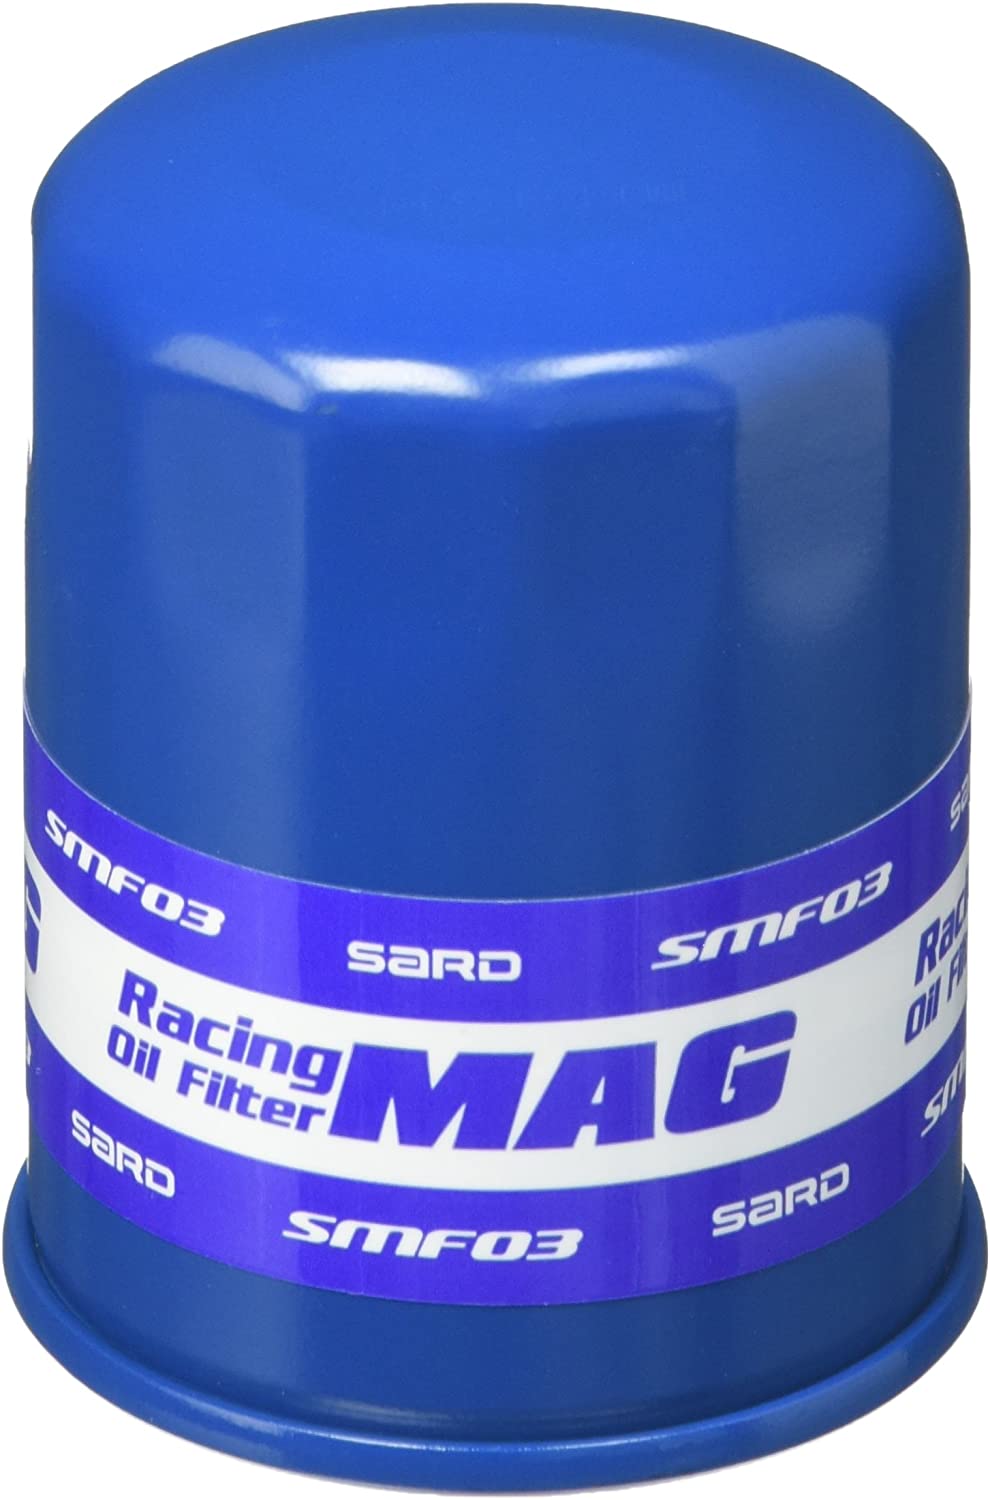 SARD RACING OIL FILTER For MOVE L902S L912S SMF00